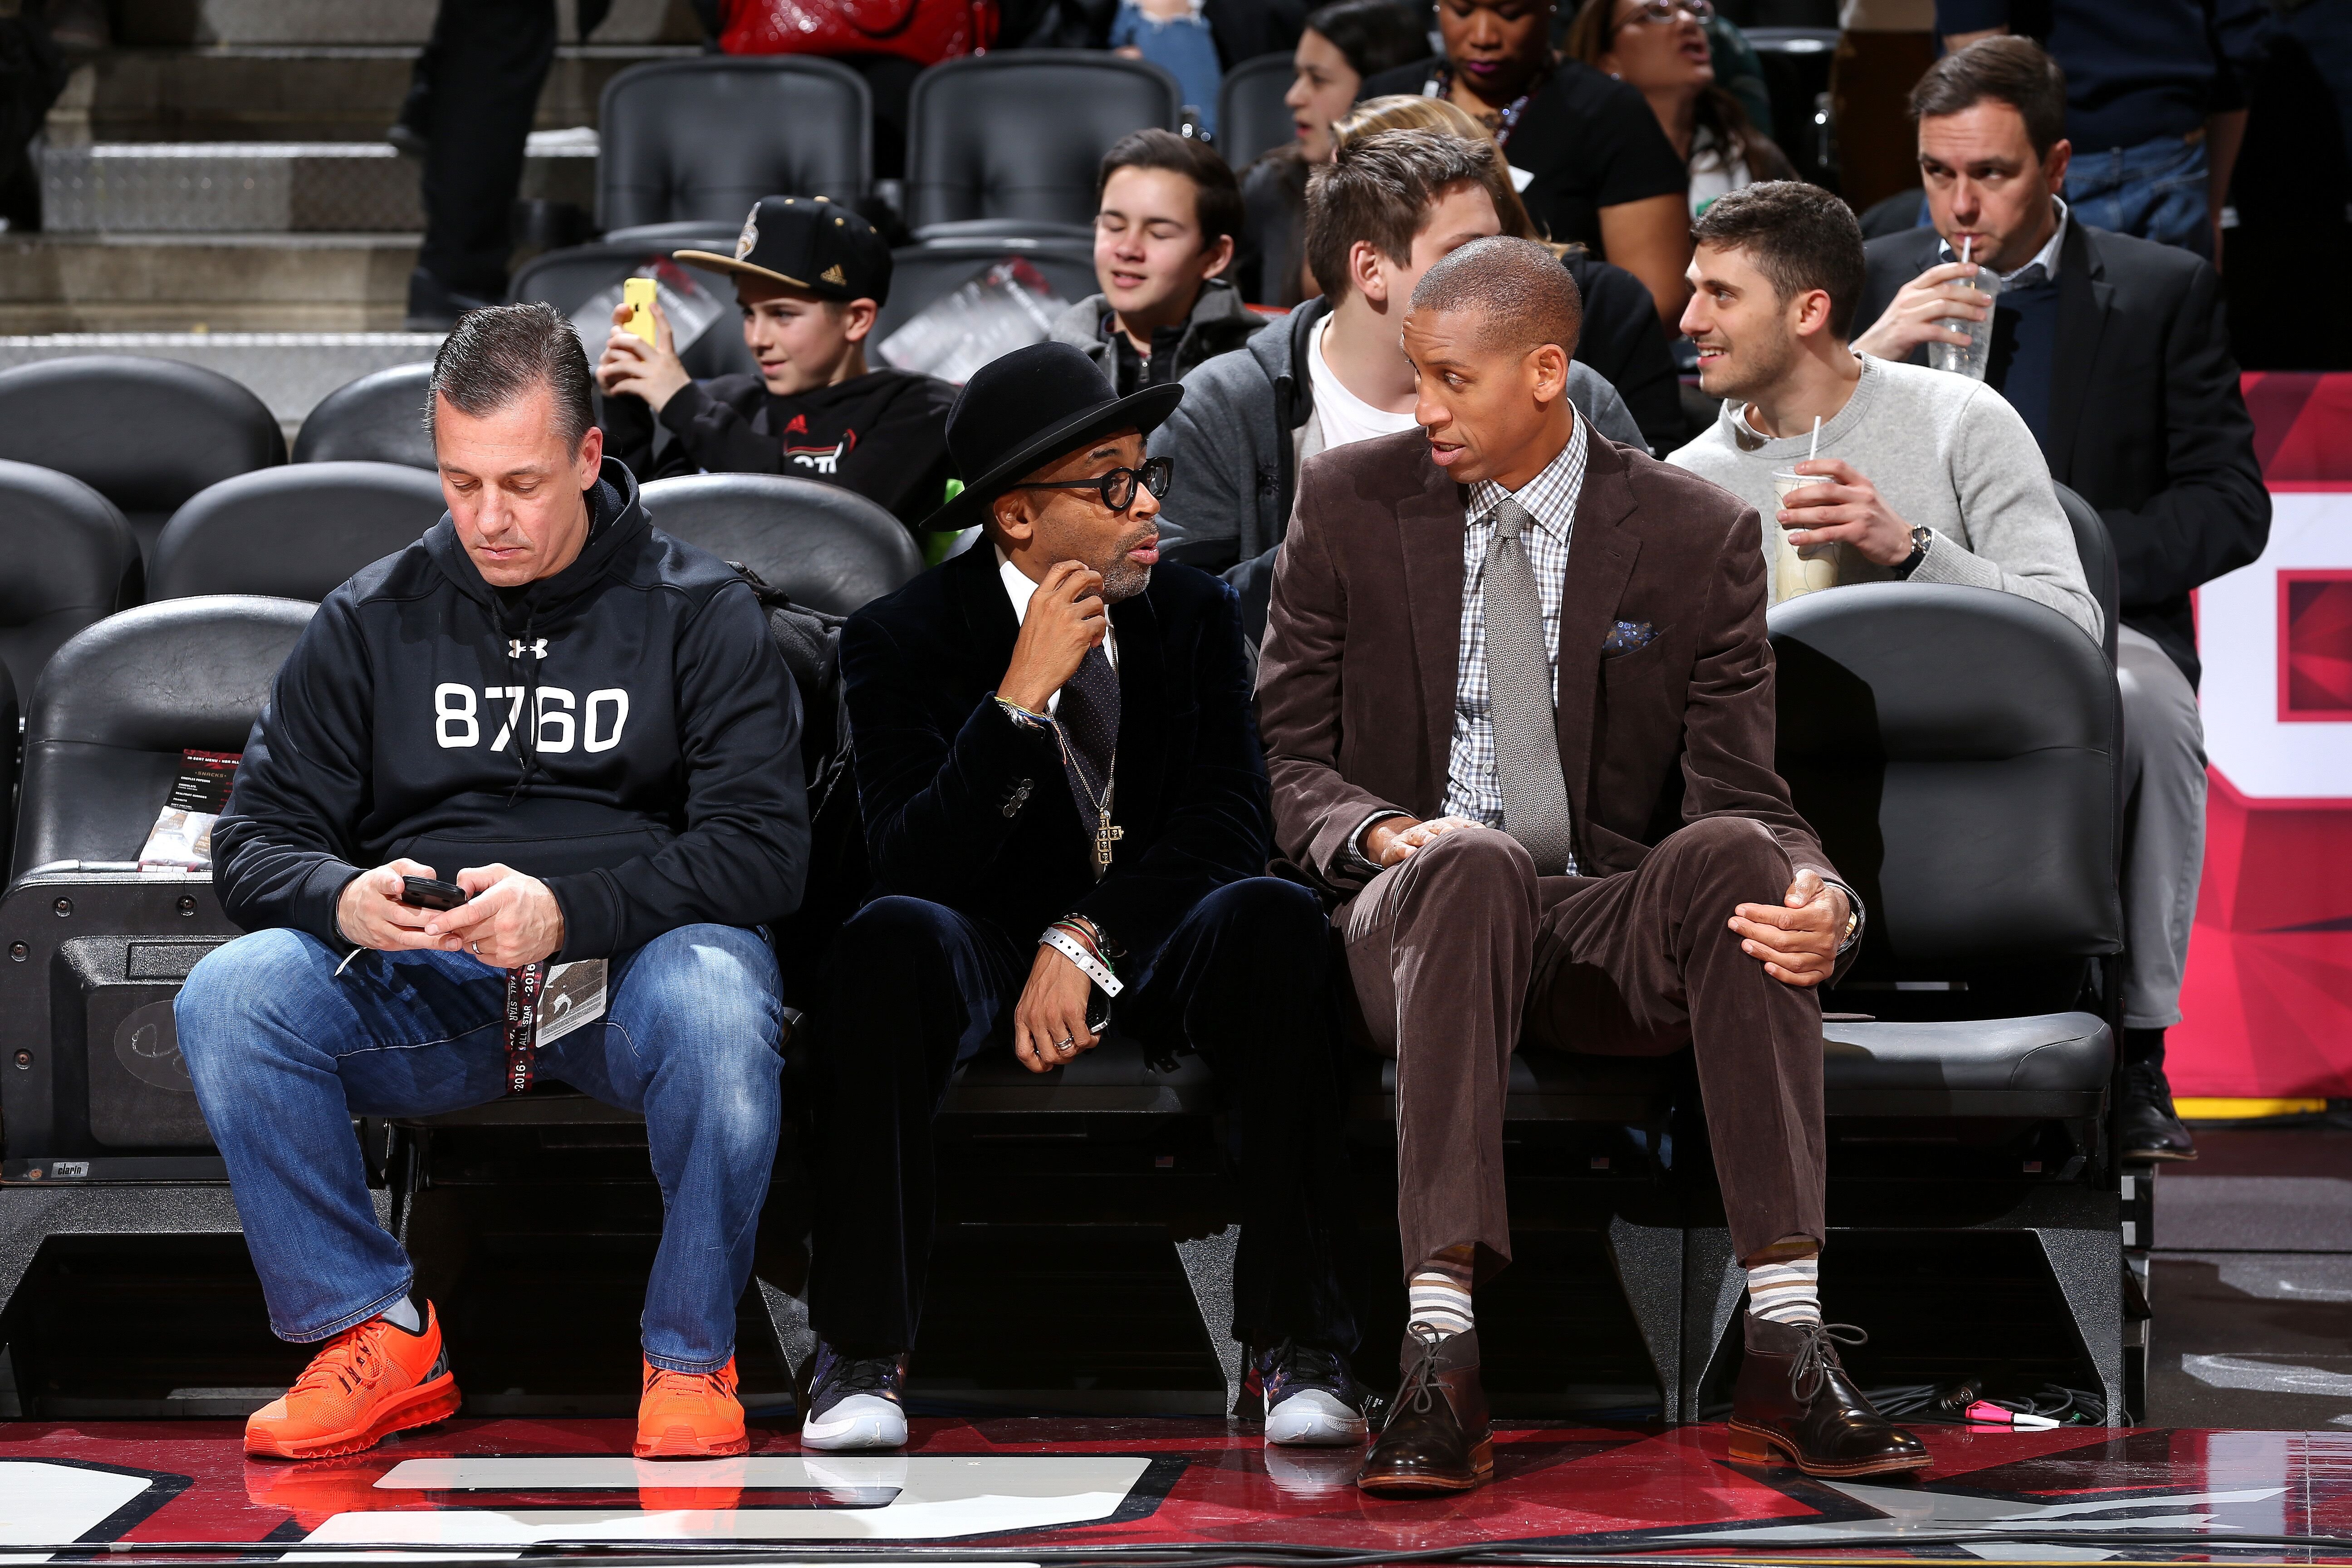 Spike Lee and former NBA player Reggie Miller of the Indiana Pacers have a discussion during the Taco Bell Skills Challenge as part of NBA All-Star 2016 in Toronto | Source: Getty Images